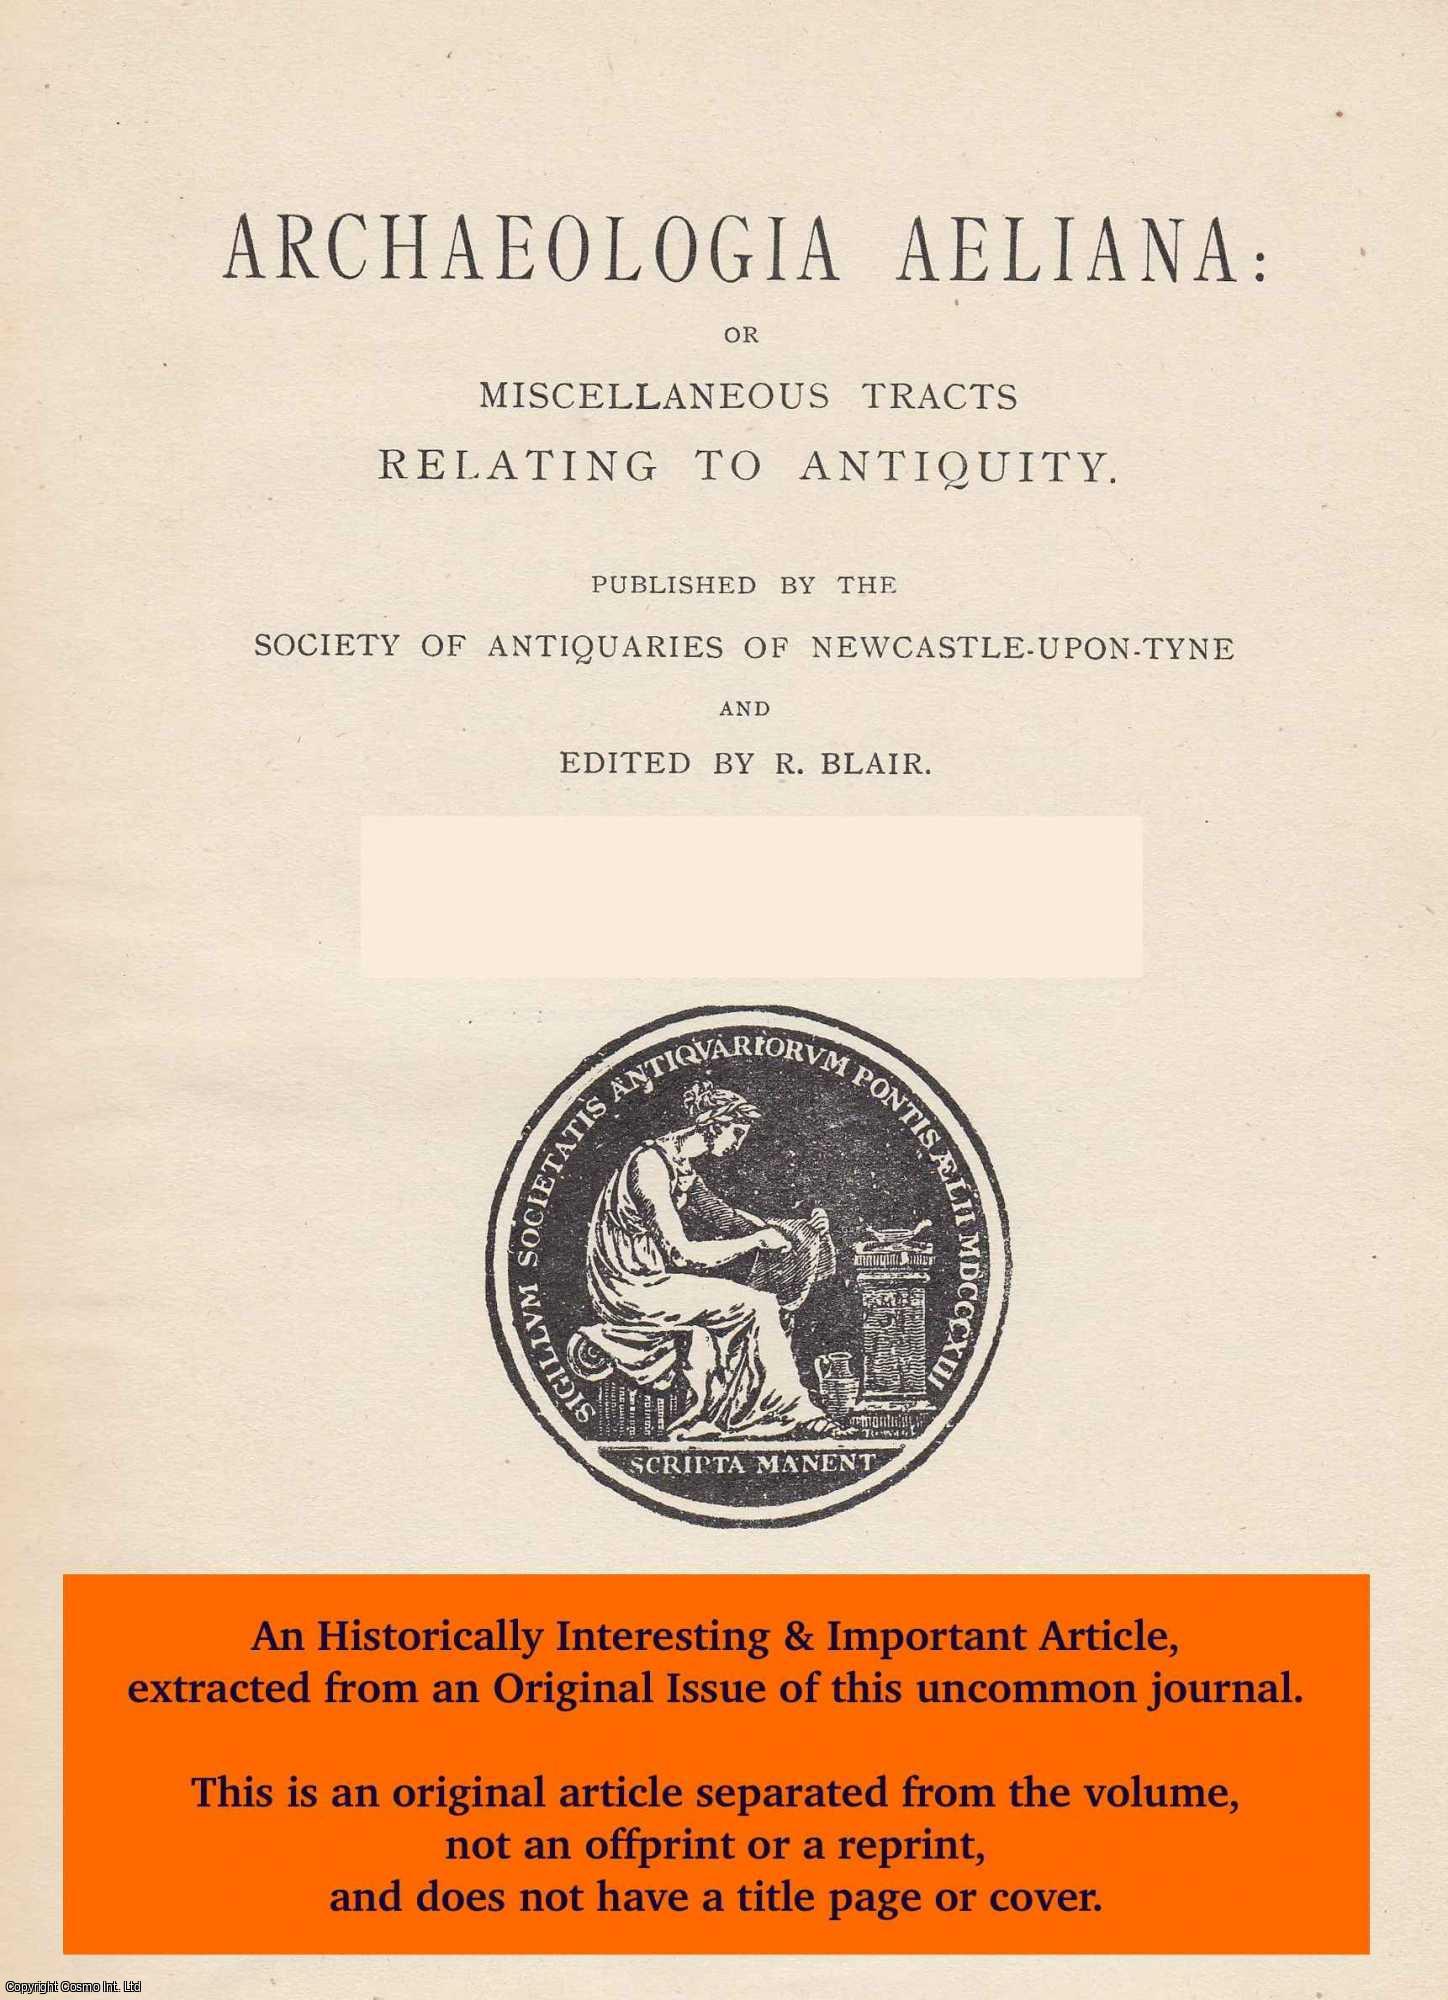 G. R. Batho, G. R. - The State of Alnwick Castle, 1557-1632. An original article from The Archaeologia Aeliana: or Miscellaneous Tracts Relating to Antiquity, 1958.